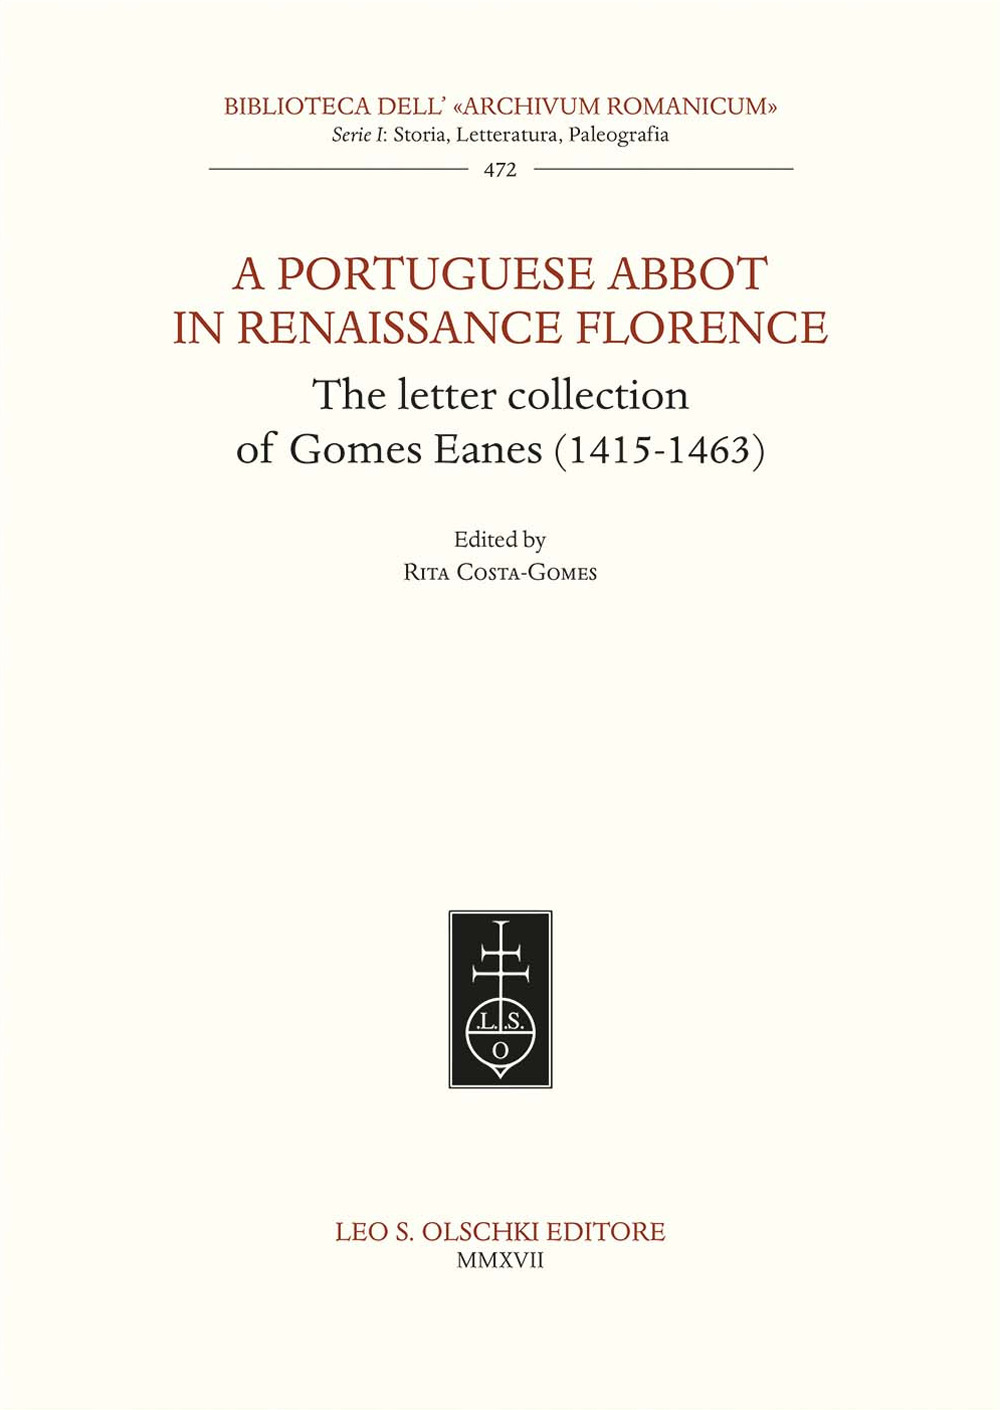 A Portuguese Abbot in Renaissance Florence. The letter collection of Gomes Eanes (1415-1463)